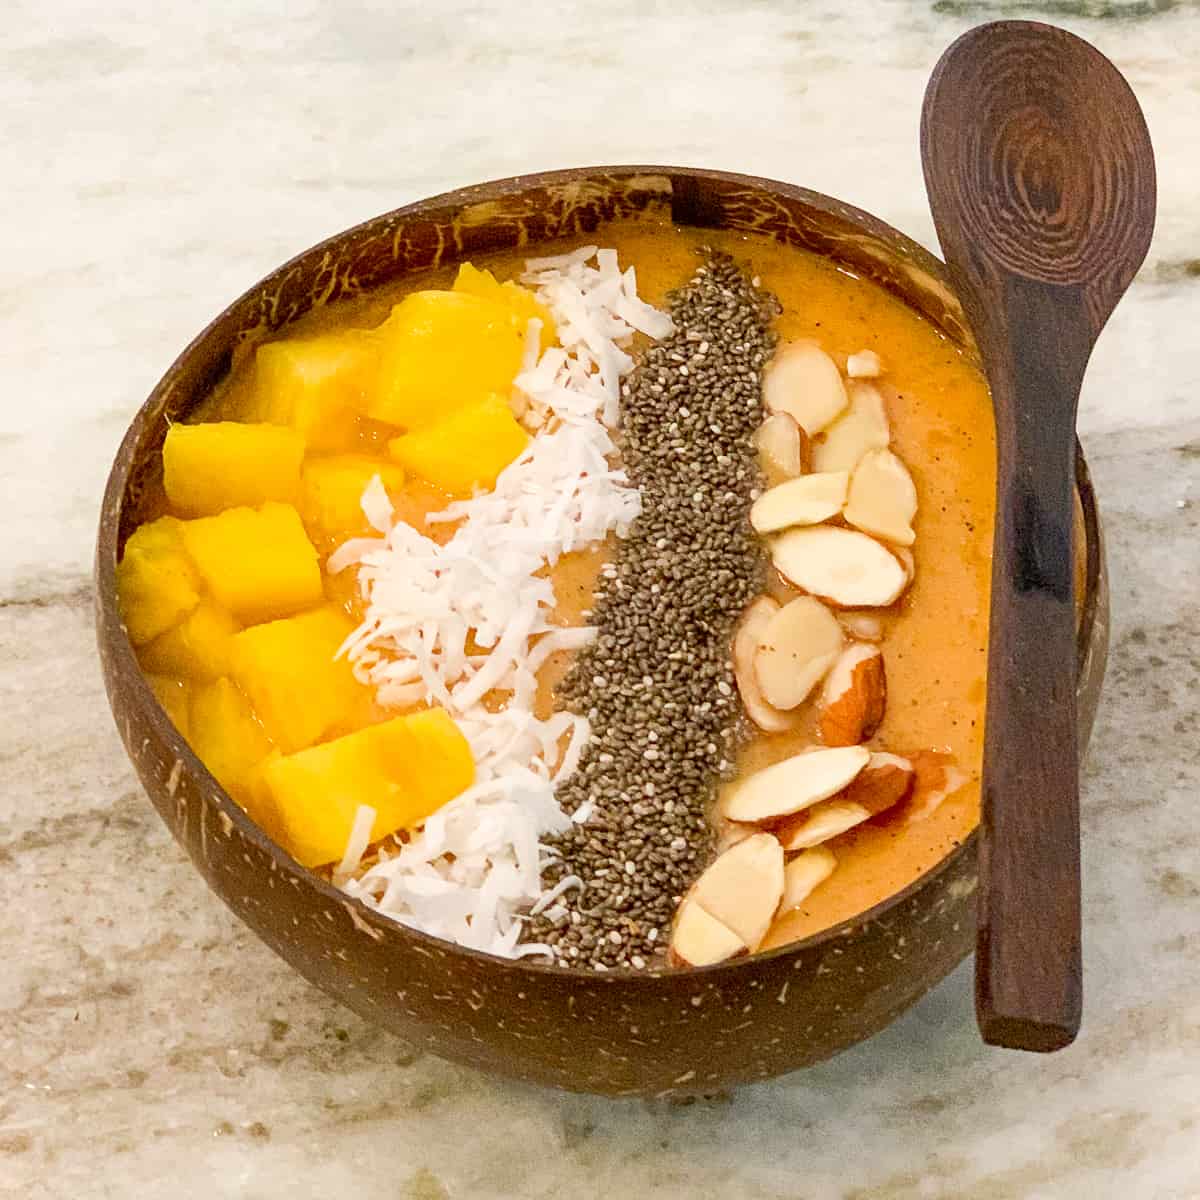 top view close up of energizing tropical fruit smoothie bowl in a wooden bowl with wooden spoon